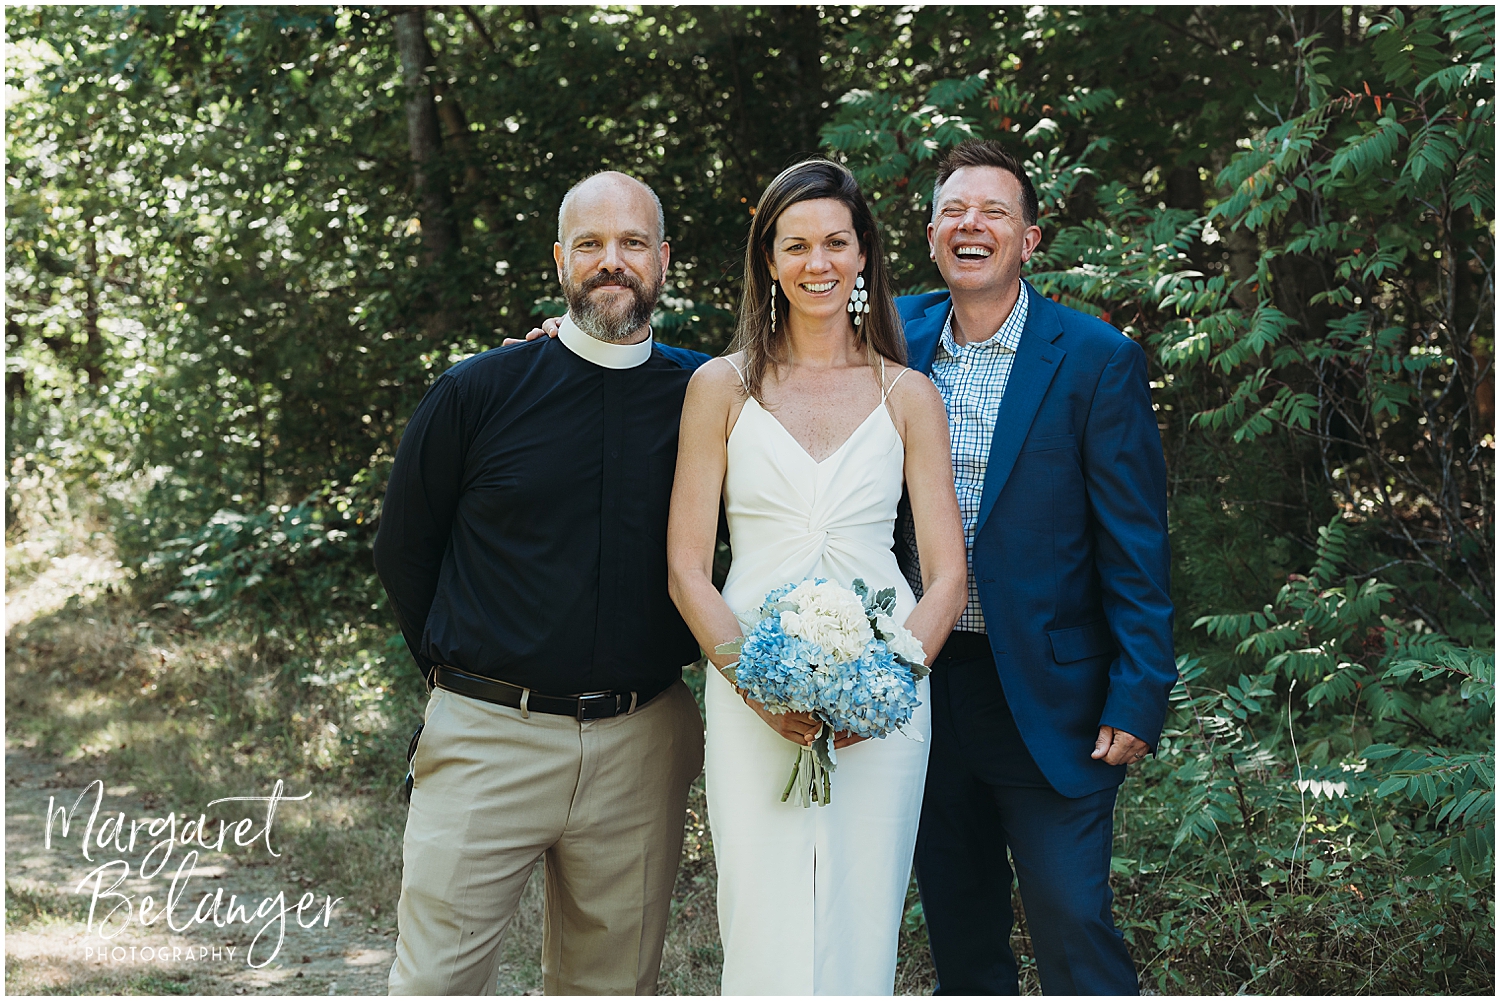 A bride in a white dress holding a bouquet stands between two smiling men, one in a clerical collar and the other in a blue suit, outdoors.